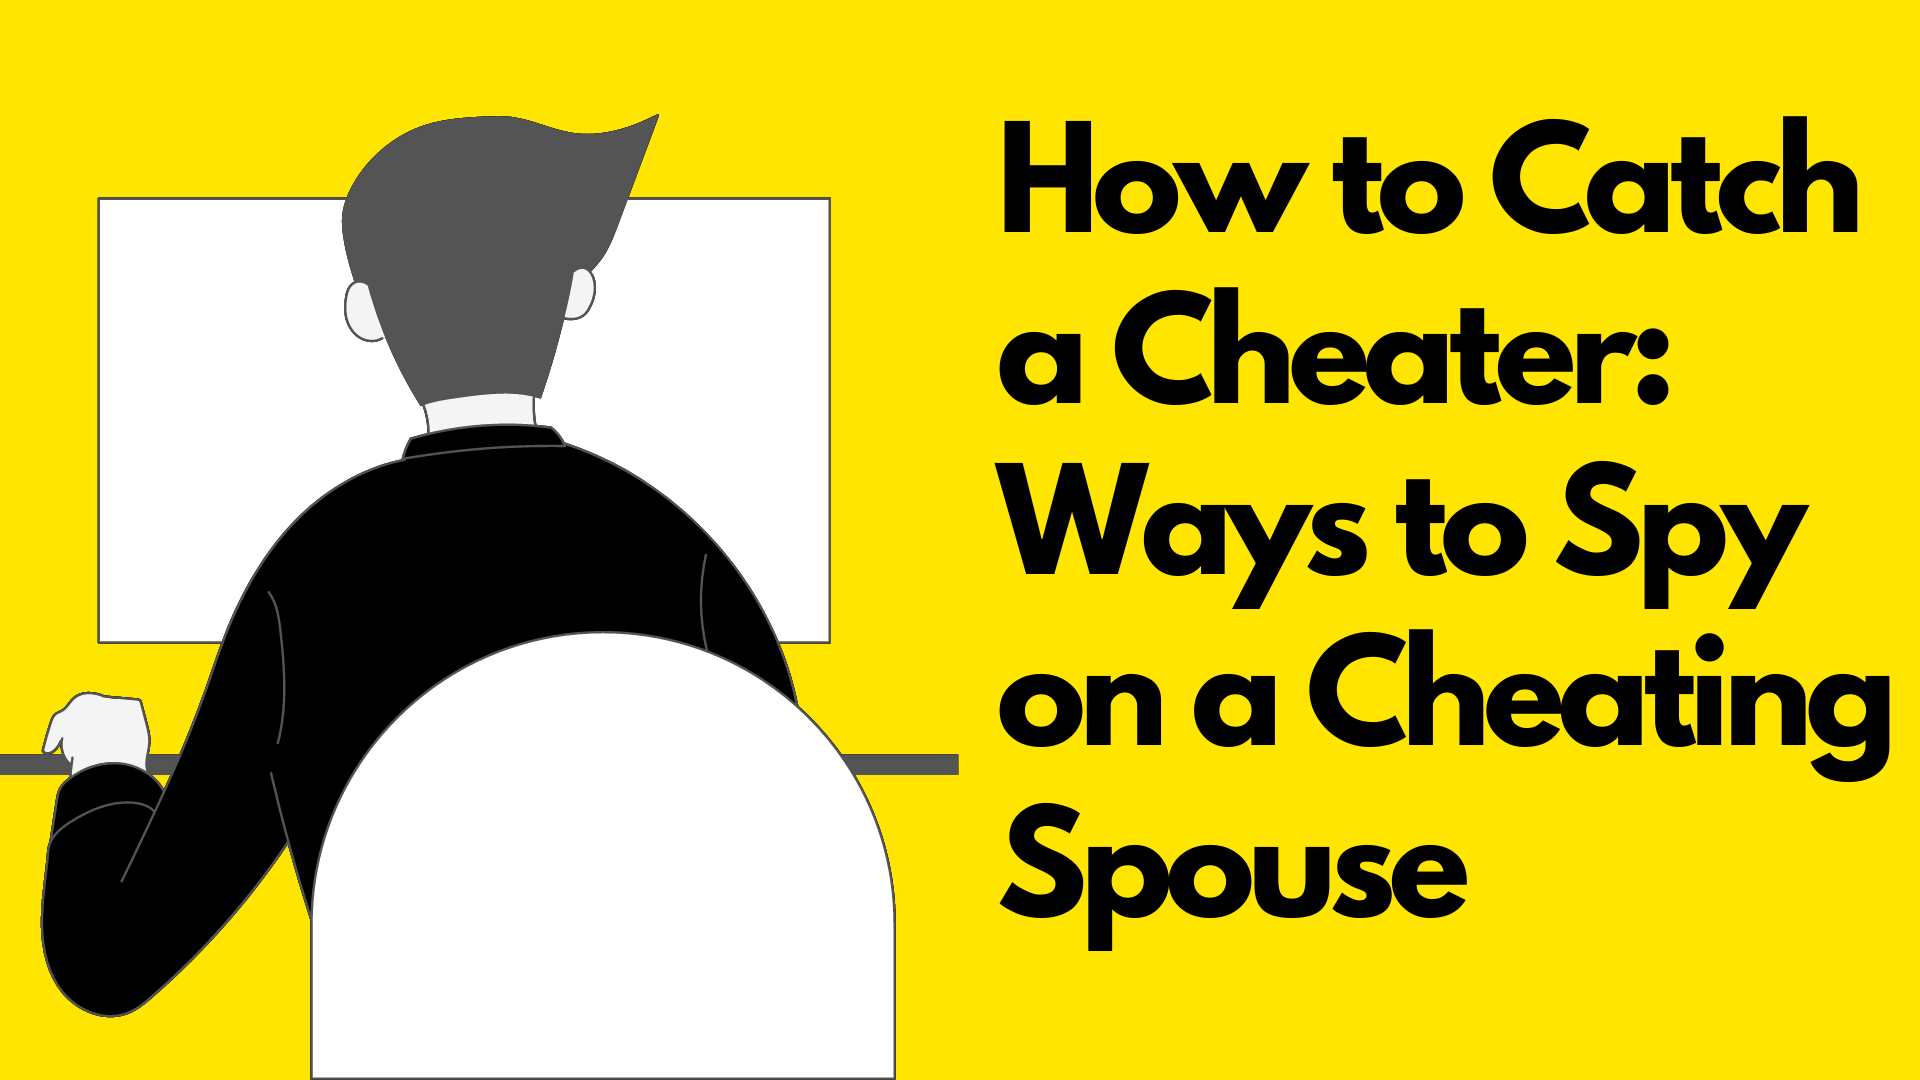 How to Catch a Cheater: 10+ Ways to Spy on a Cheating Spouse